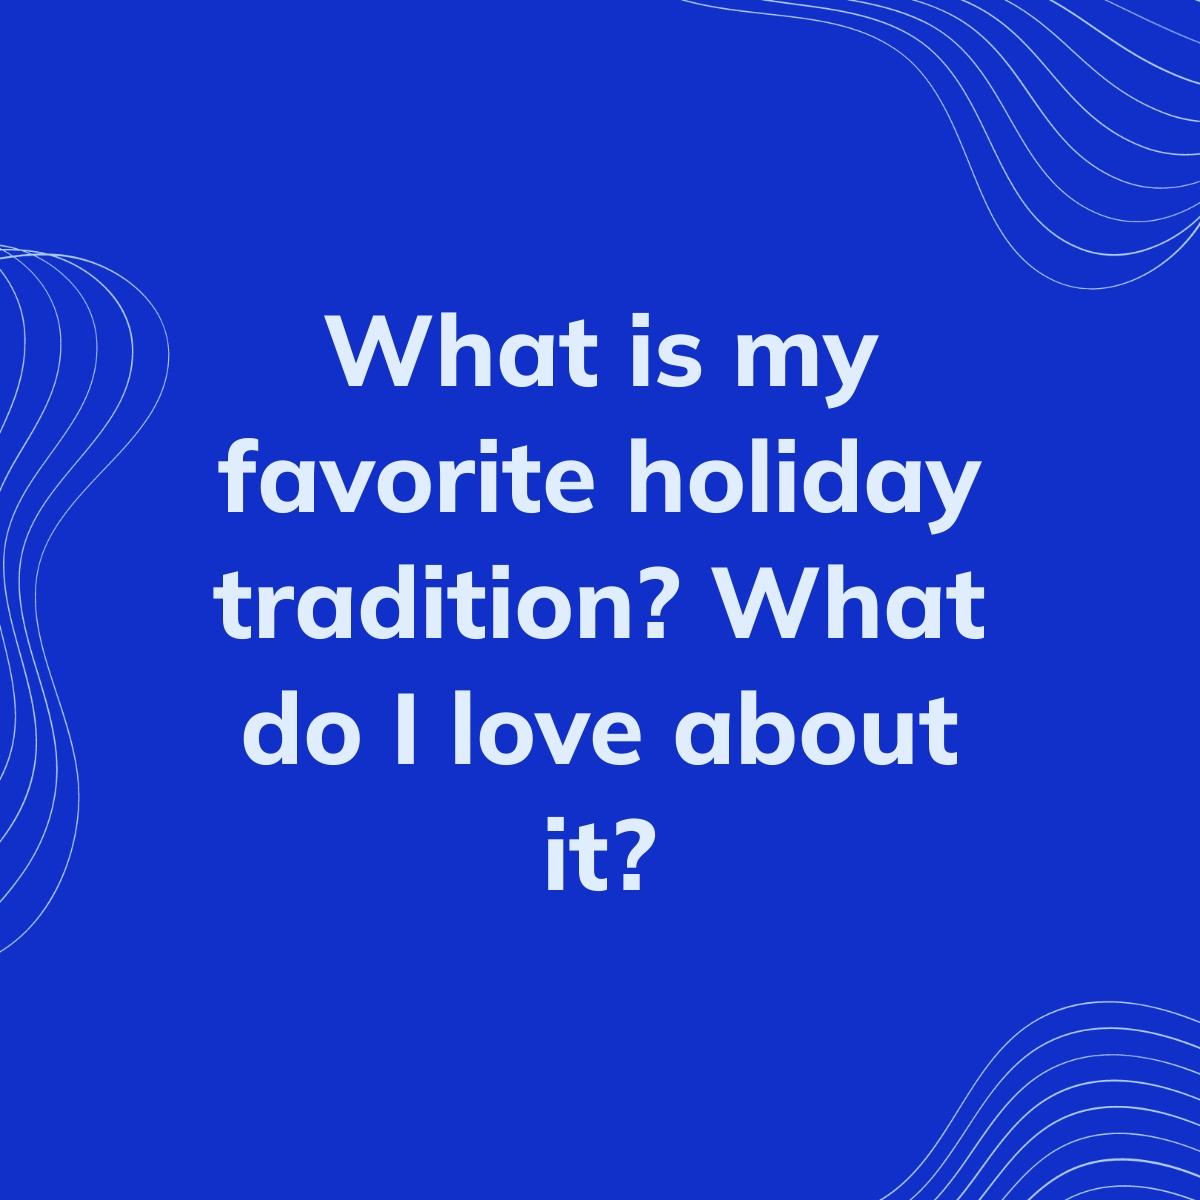 Journal Prompt: What is my favorite holiday tradition? What do I love about it?